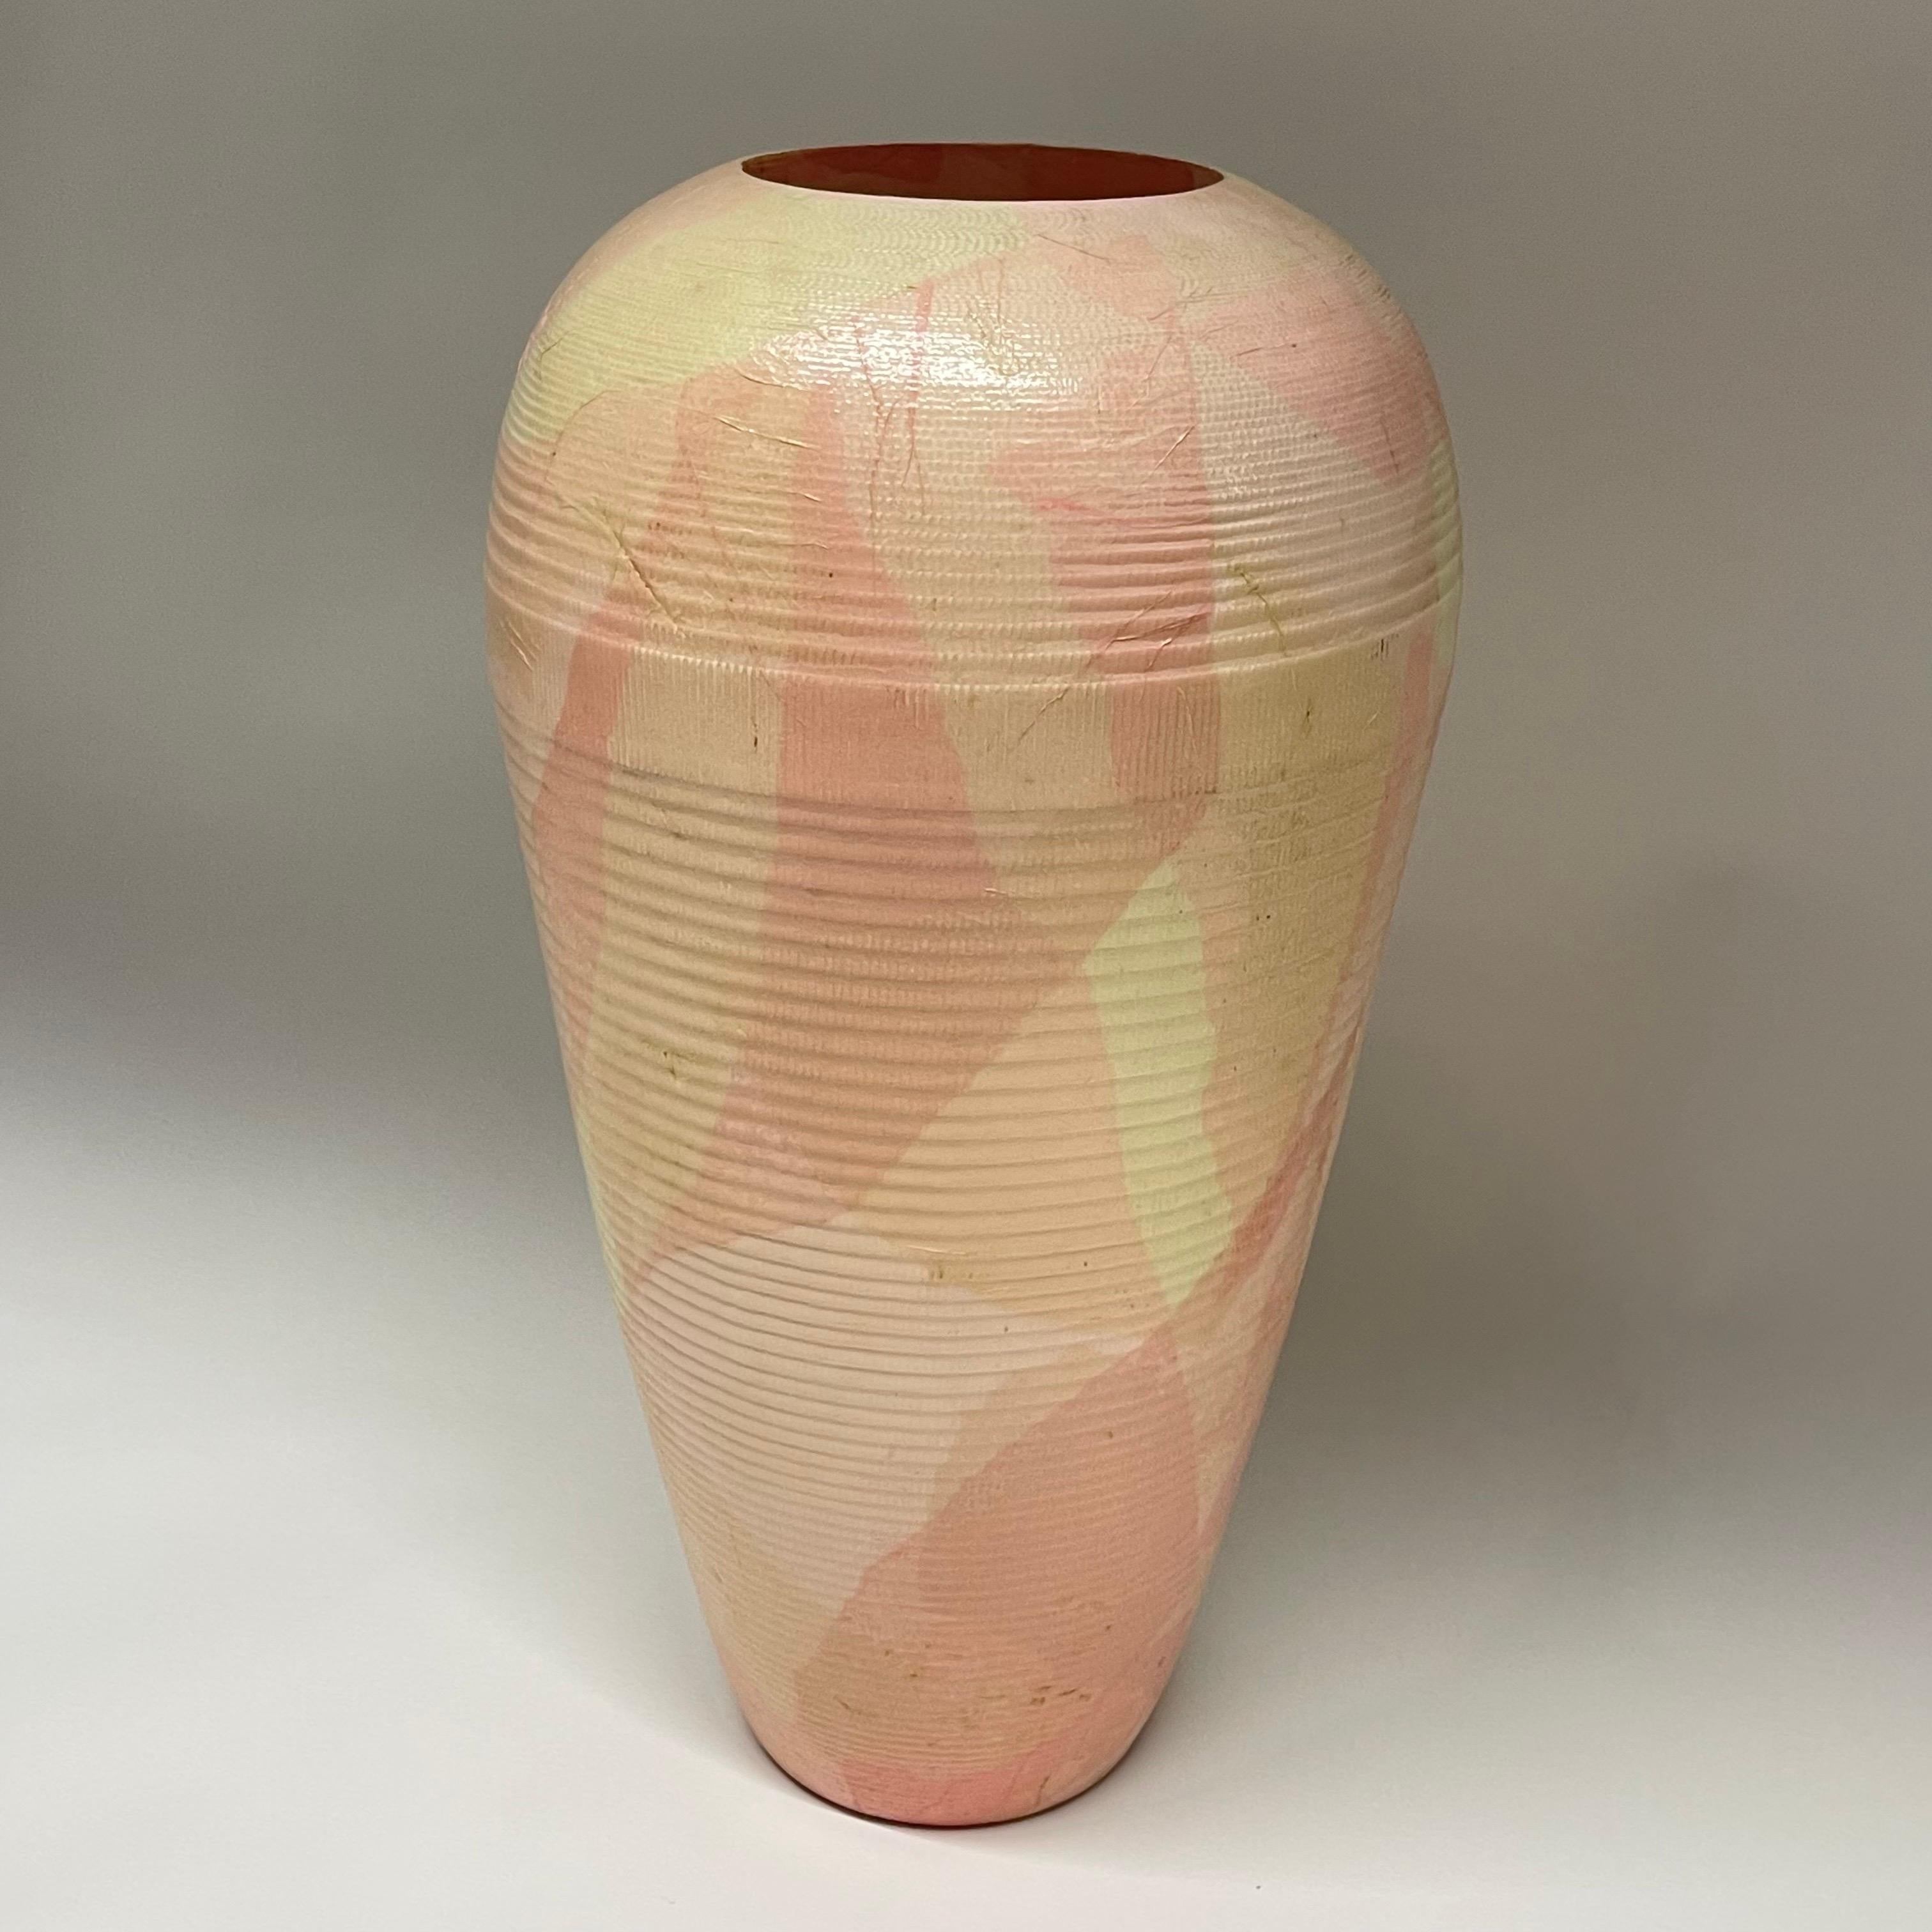 Post-Modern decorative sculpture vase, rendered in hand painted and lacquered corrugated cardboard, signed by artist, produced by Flute, Chicago, 1989.